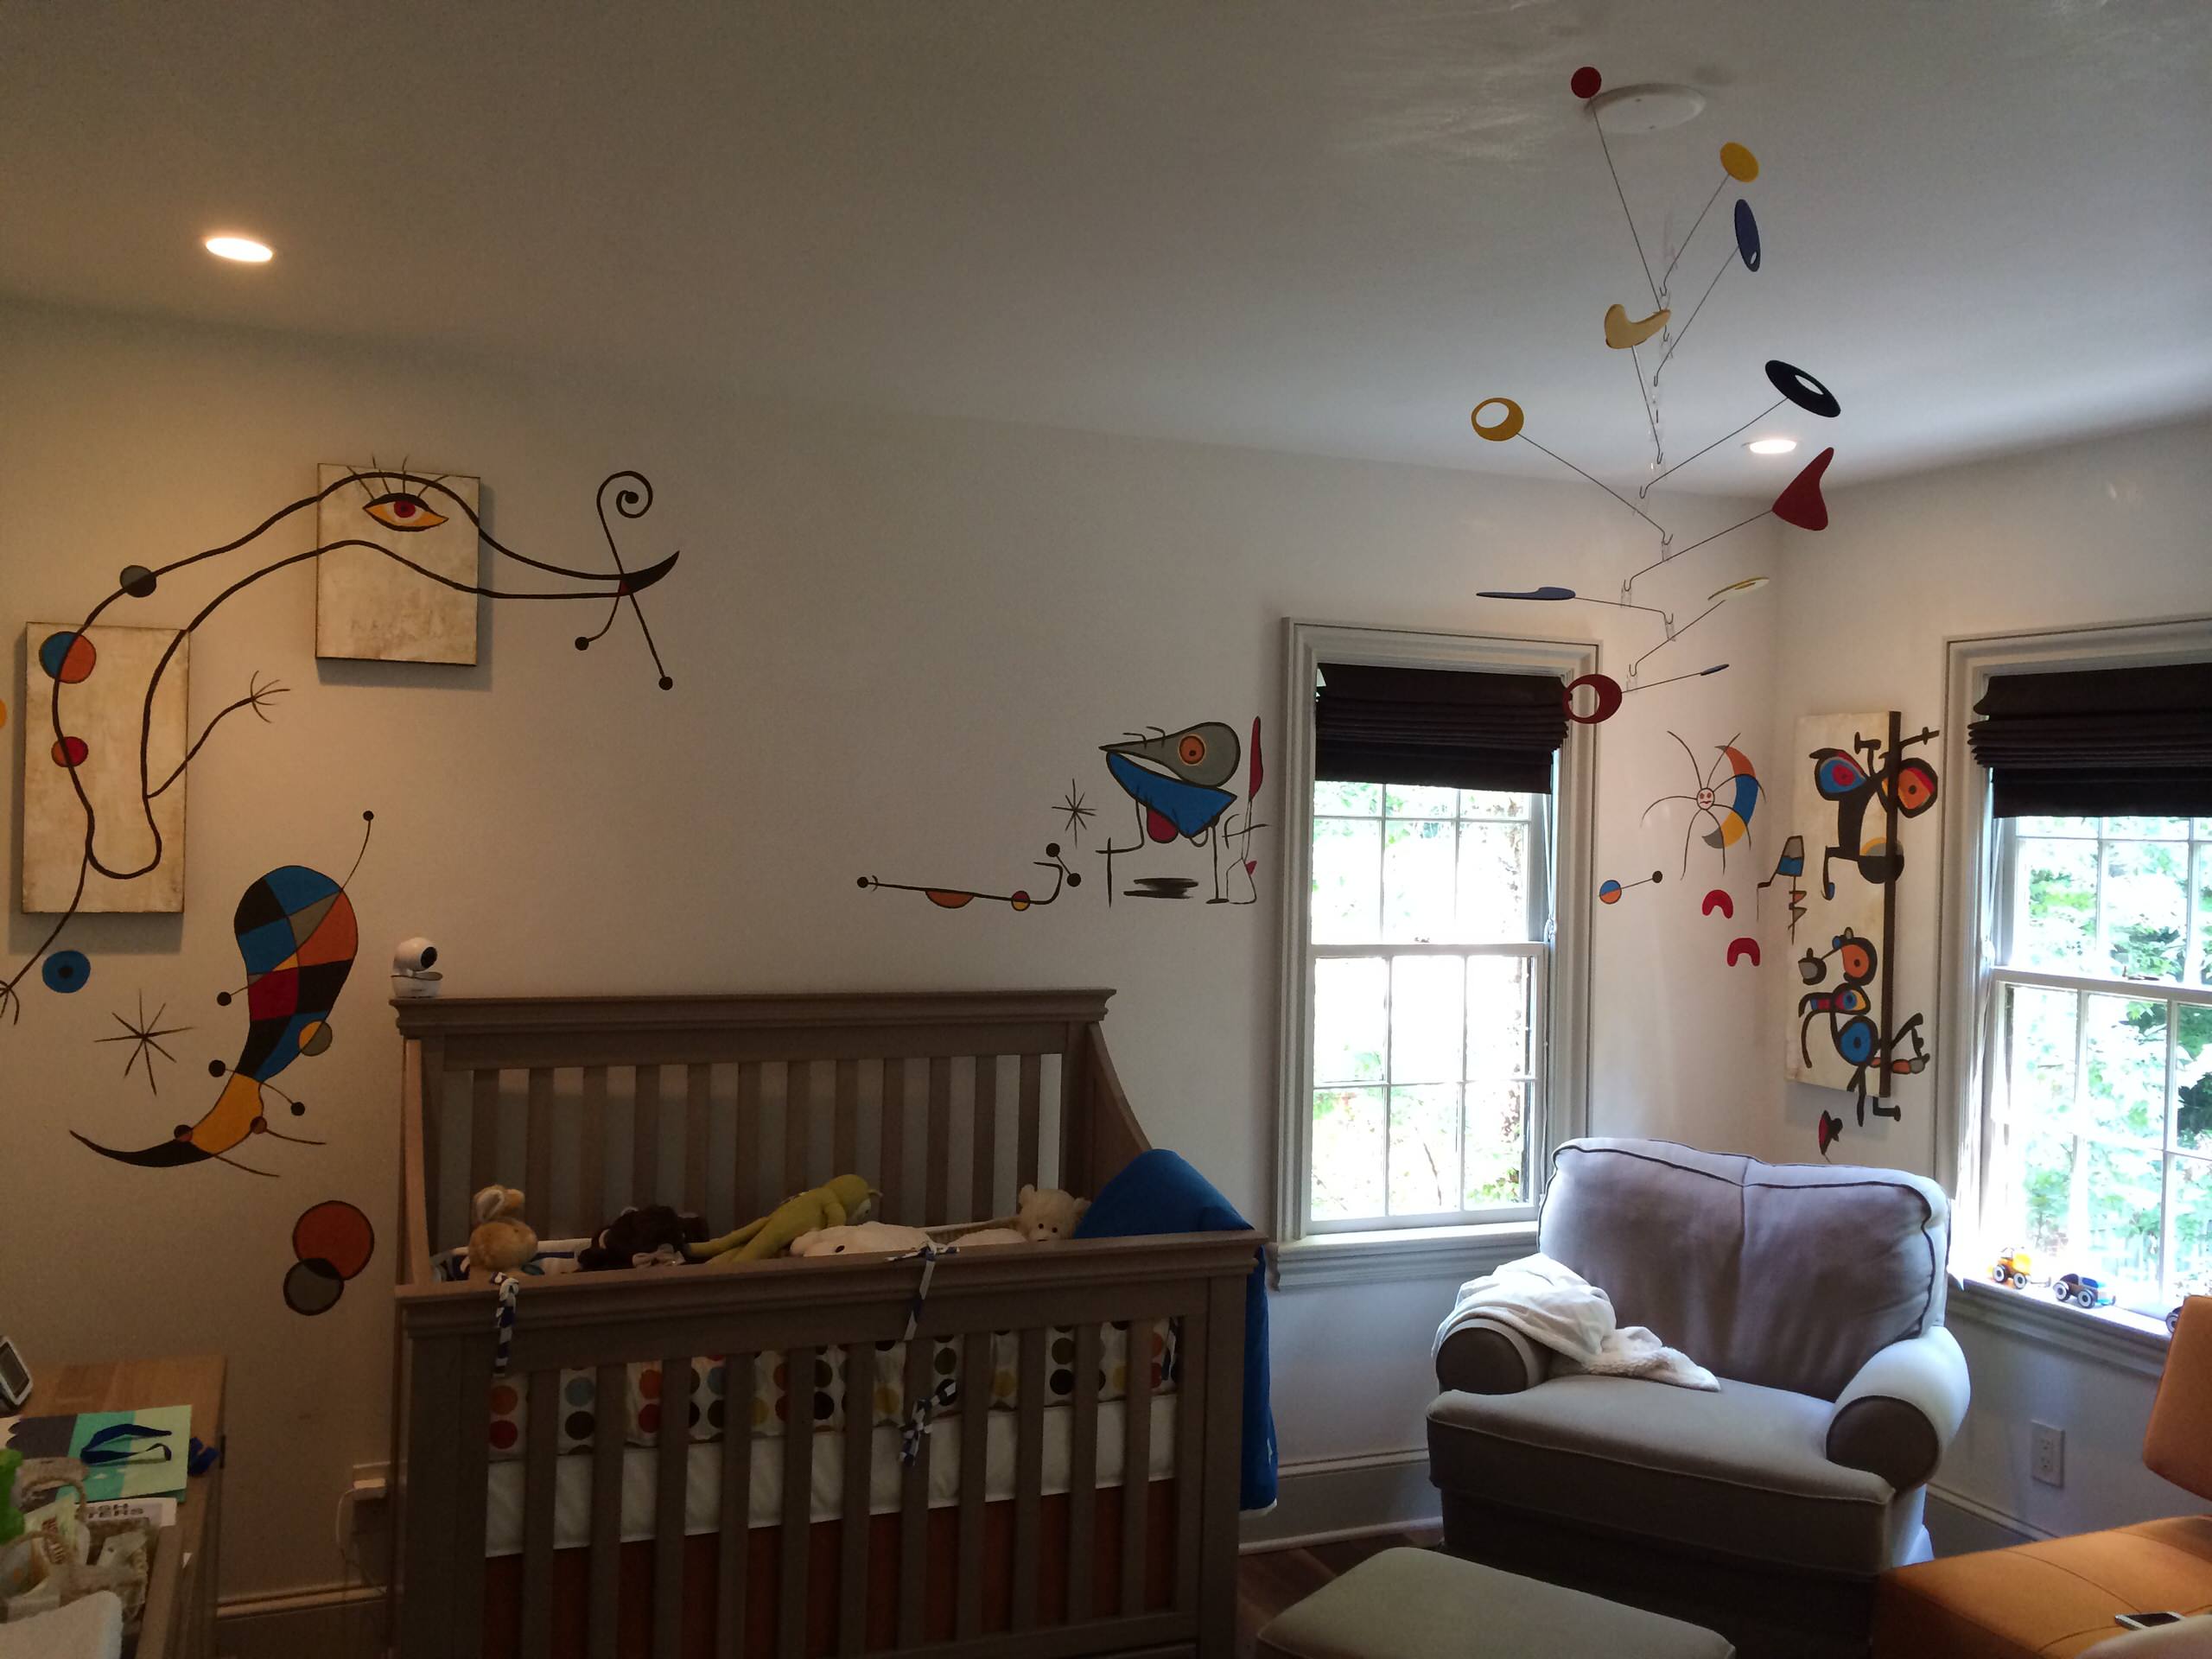 Theme rooms, Kids rooms